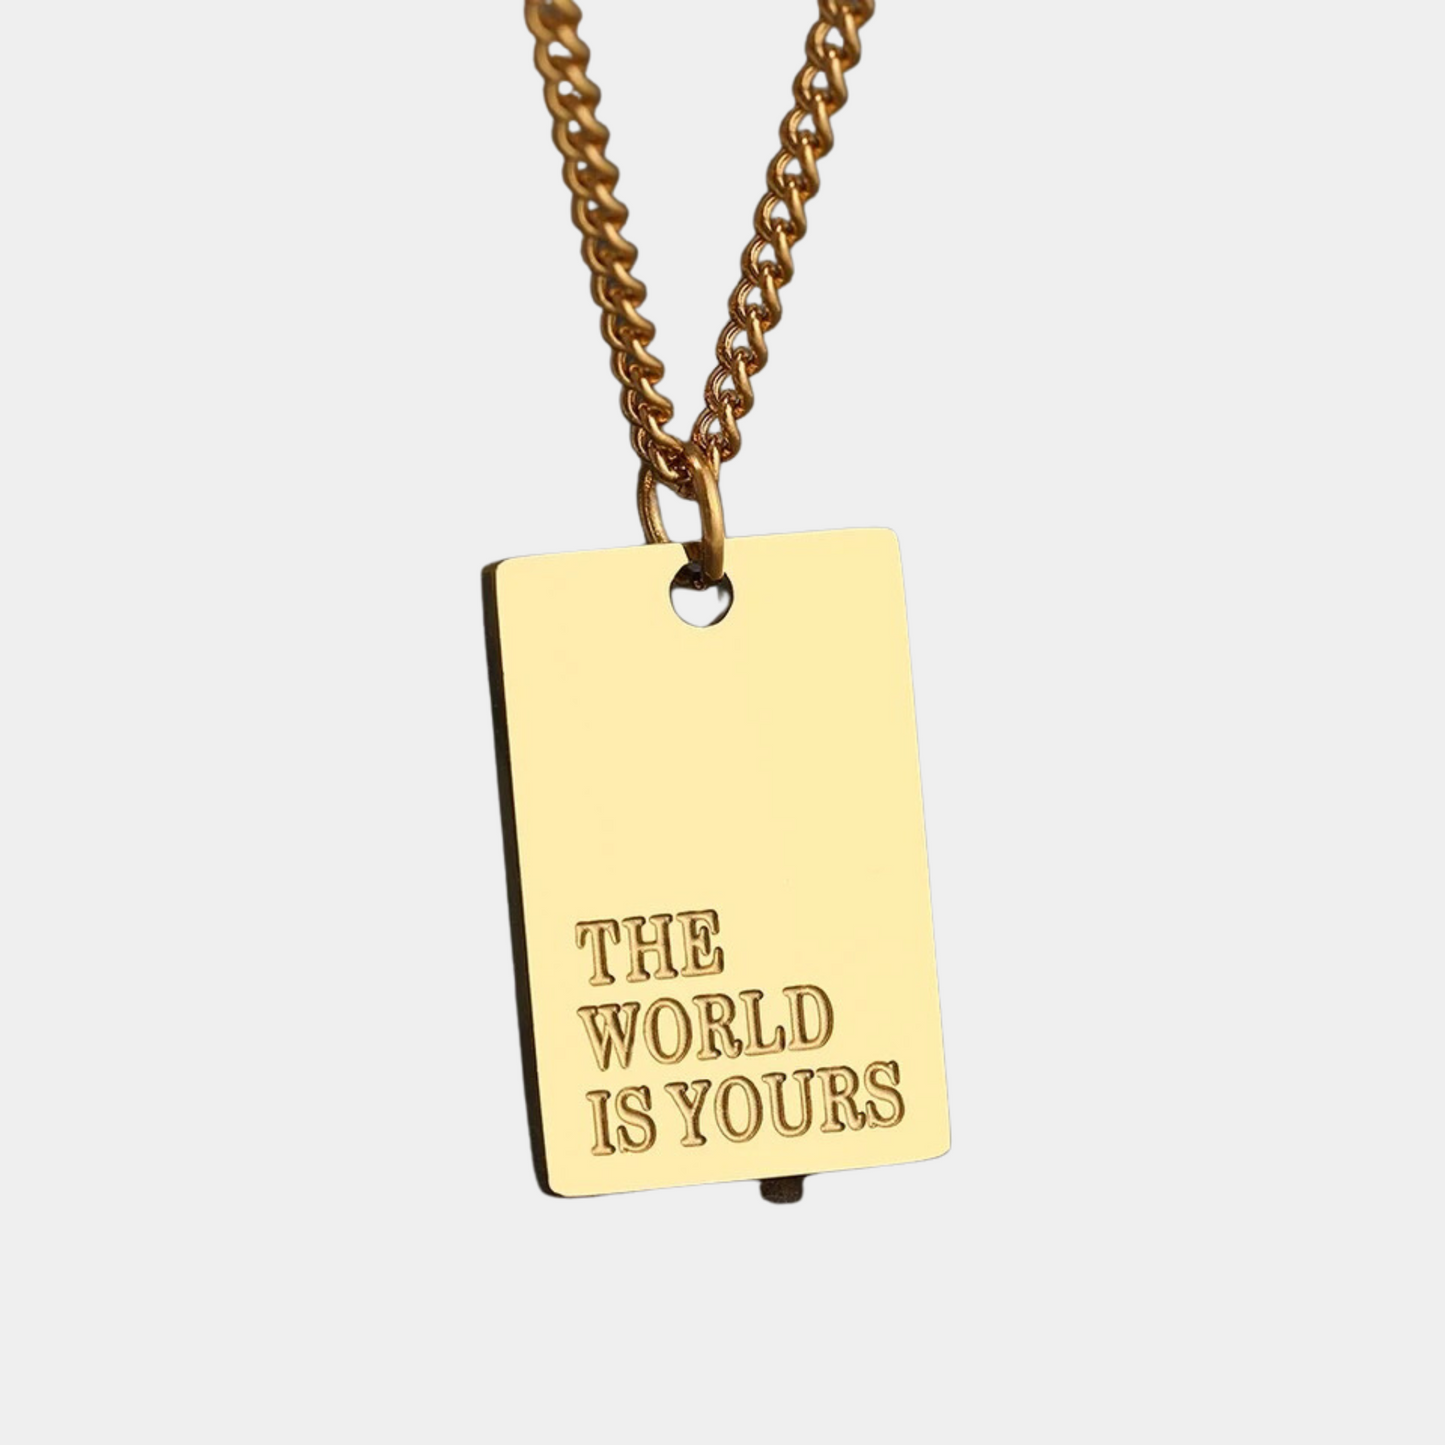 The world is yours Necklace